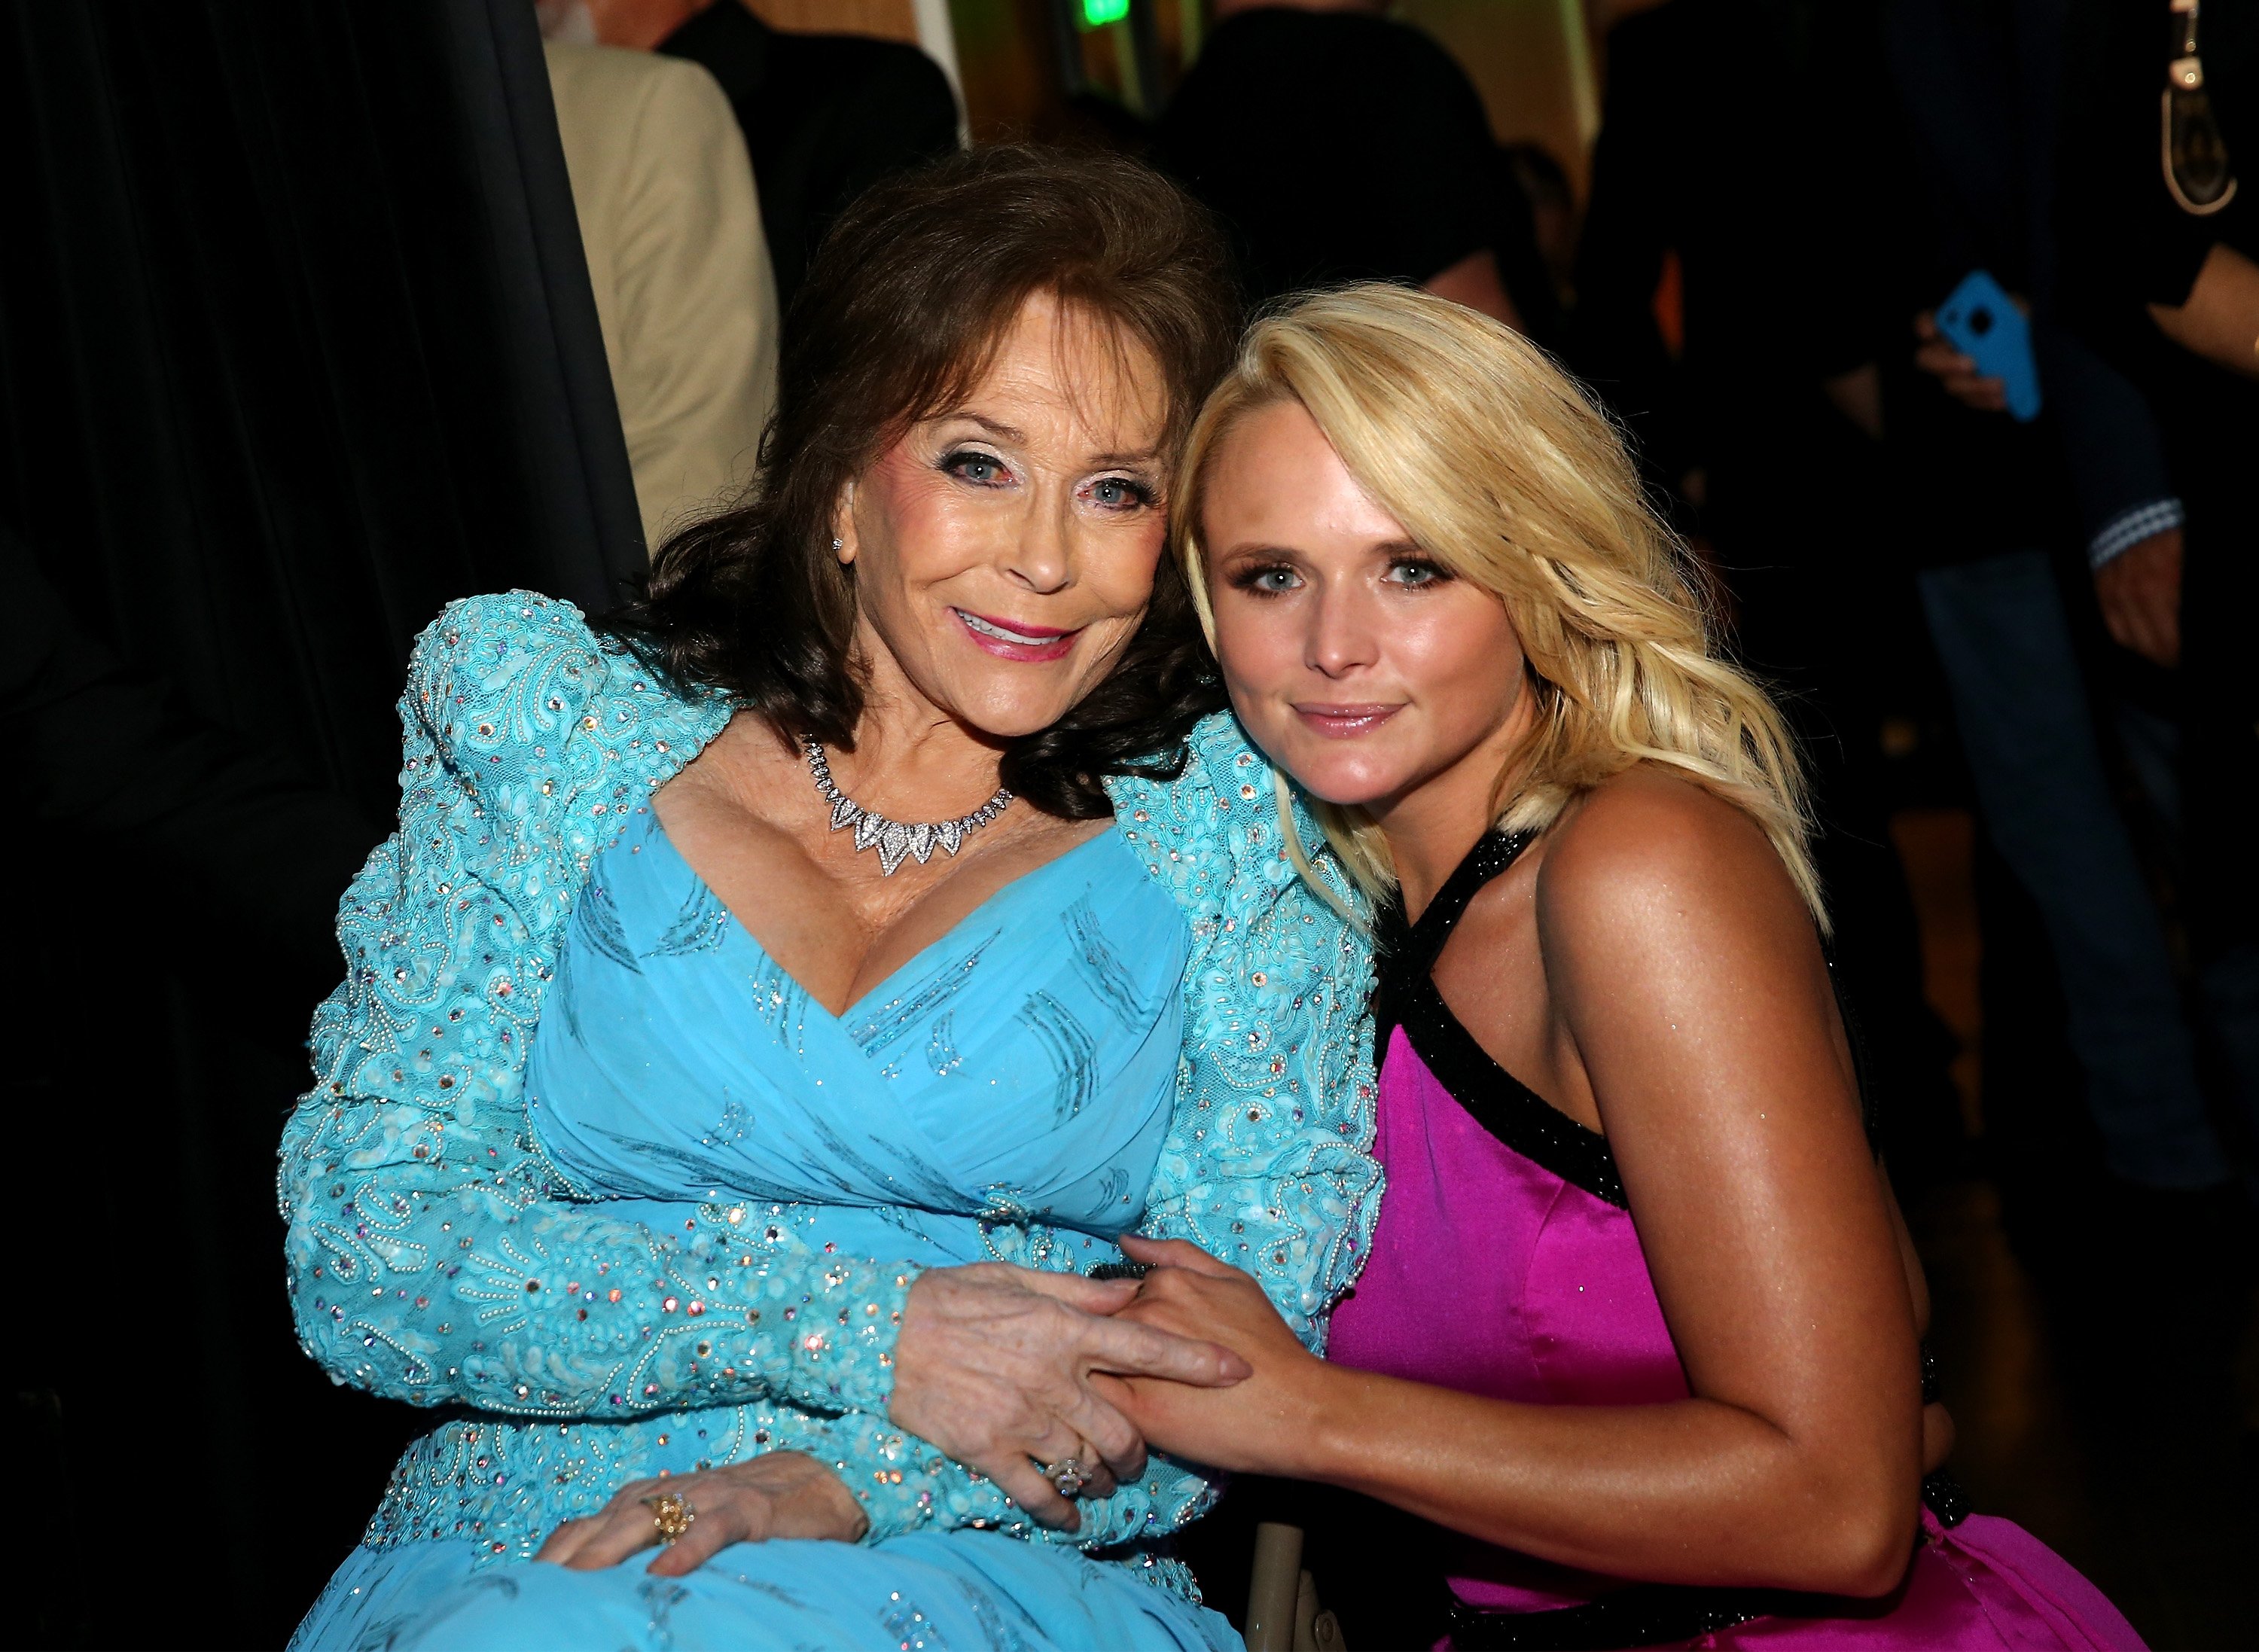 Loretta Lynn and Miranda Lambert sit beside each other holding hands while looking at the camera